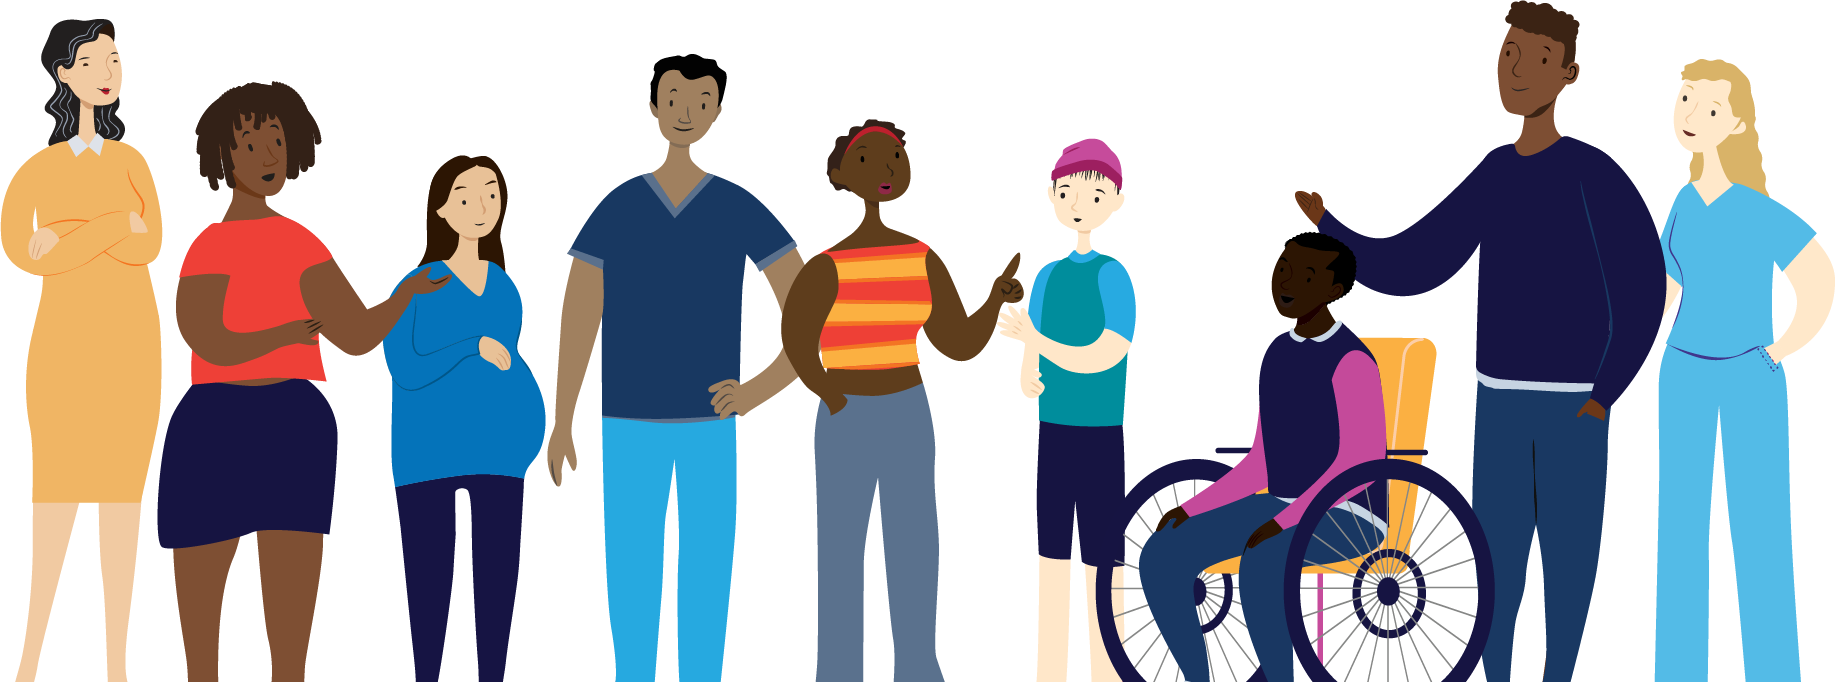 Illustration of a diverse group of people including someone in a wheelchair